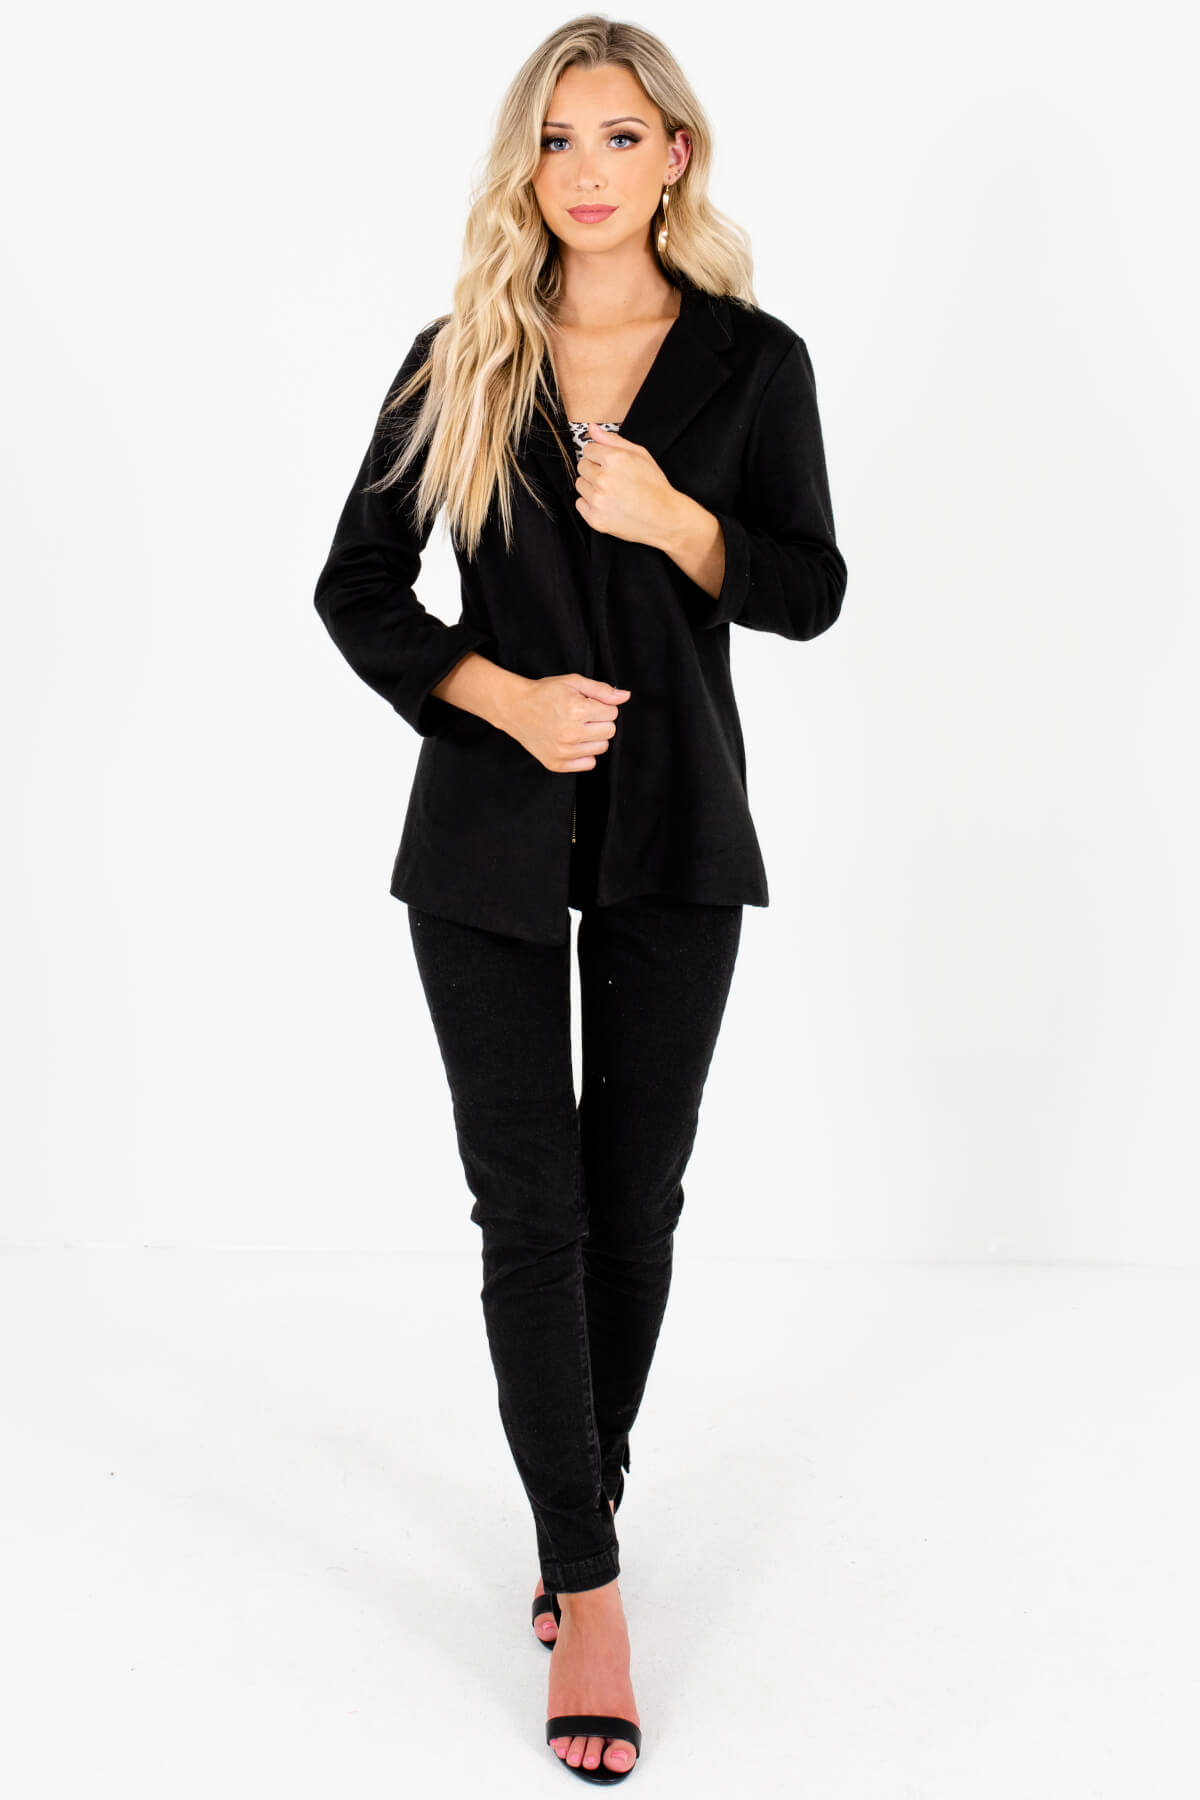 Black Soft Comfortable Casual Blazers for Women